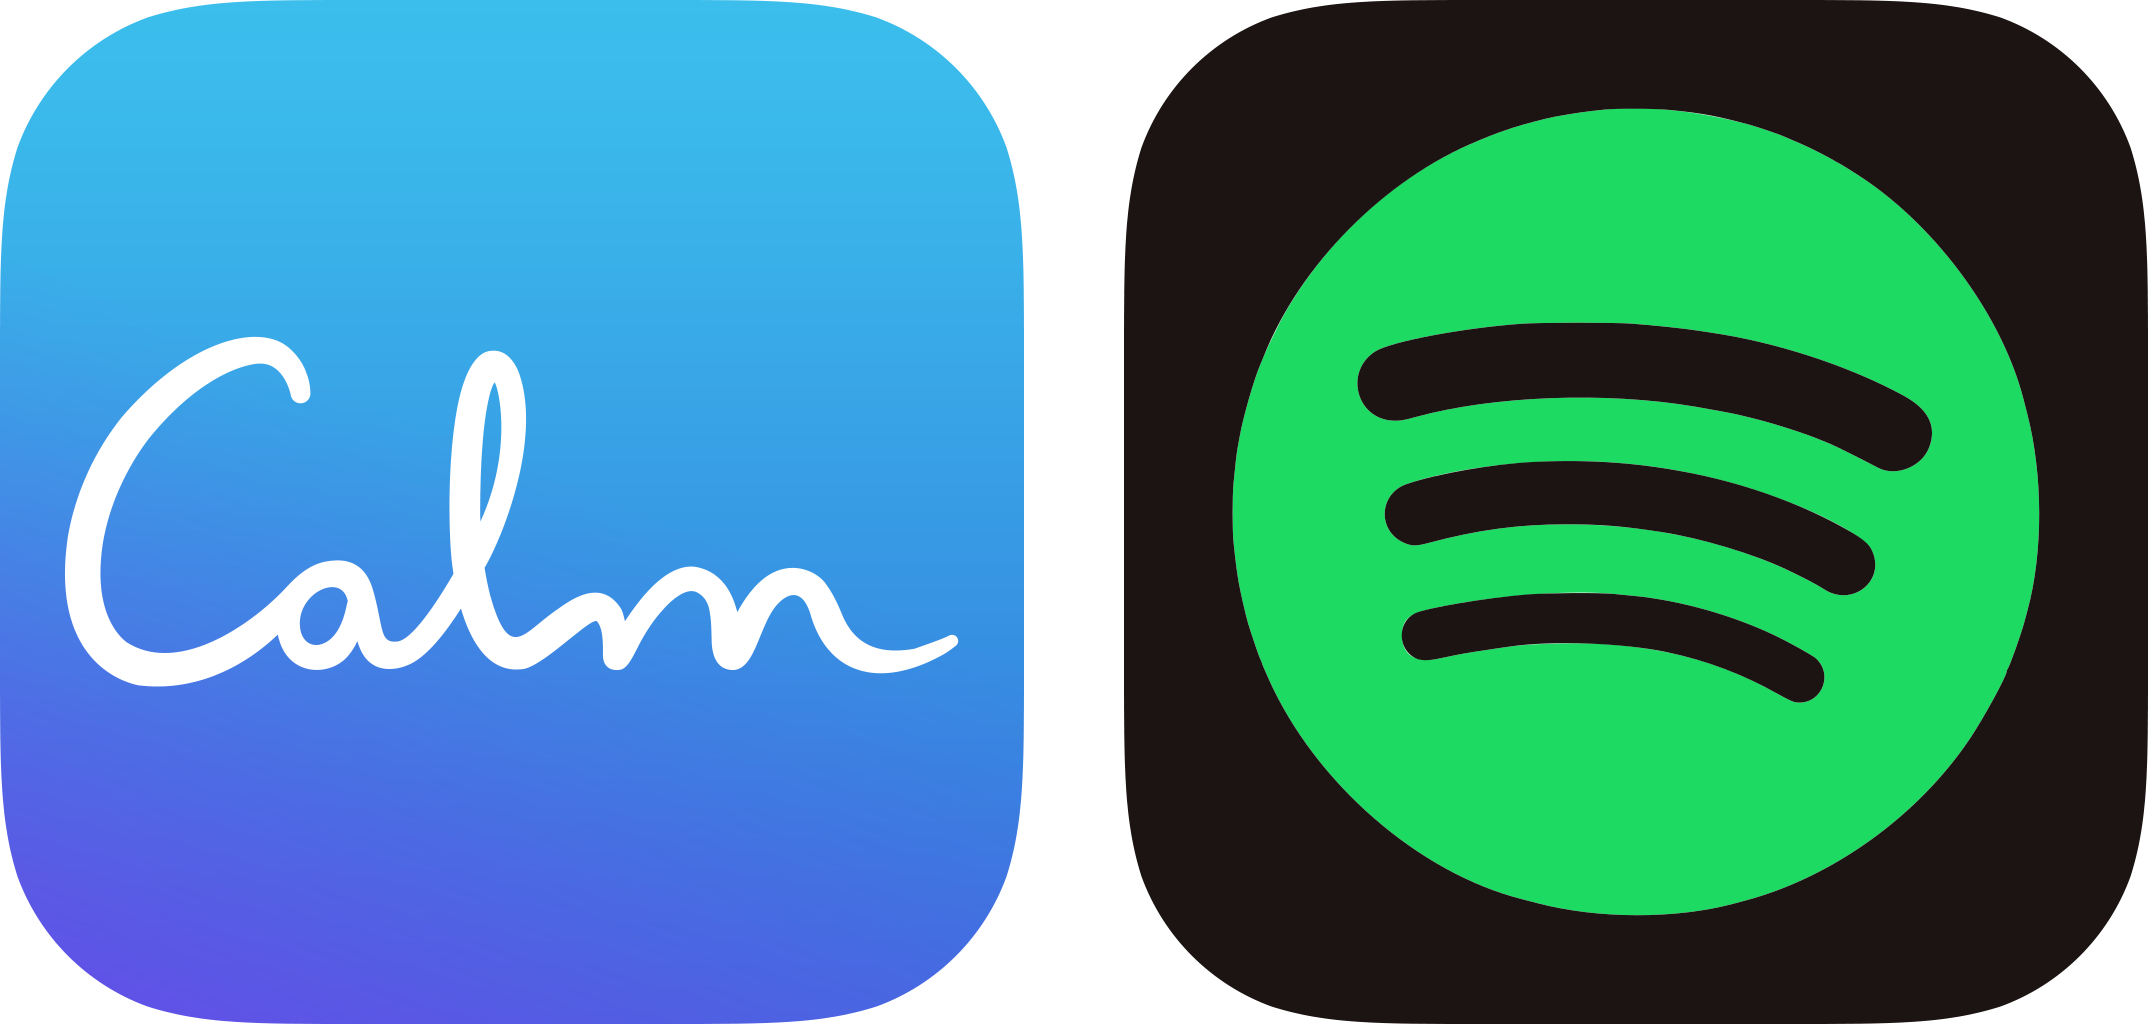 You can now access Calm content on Spotify